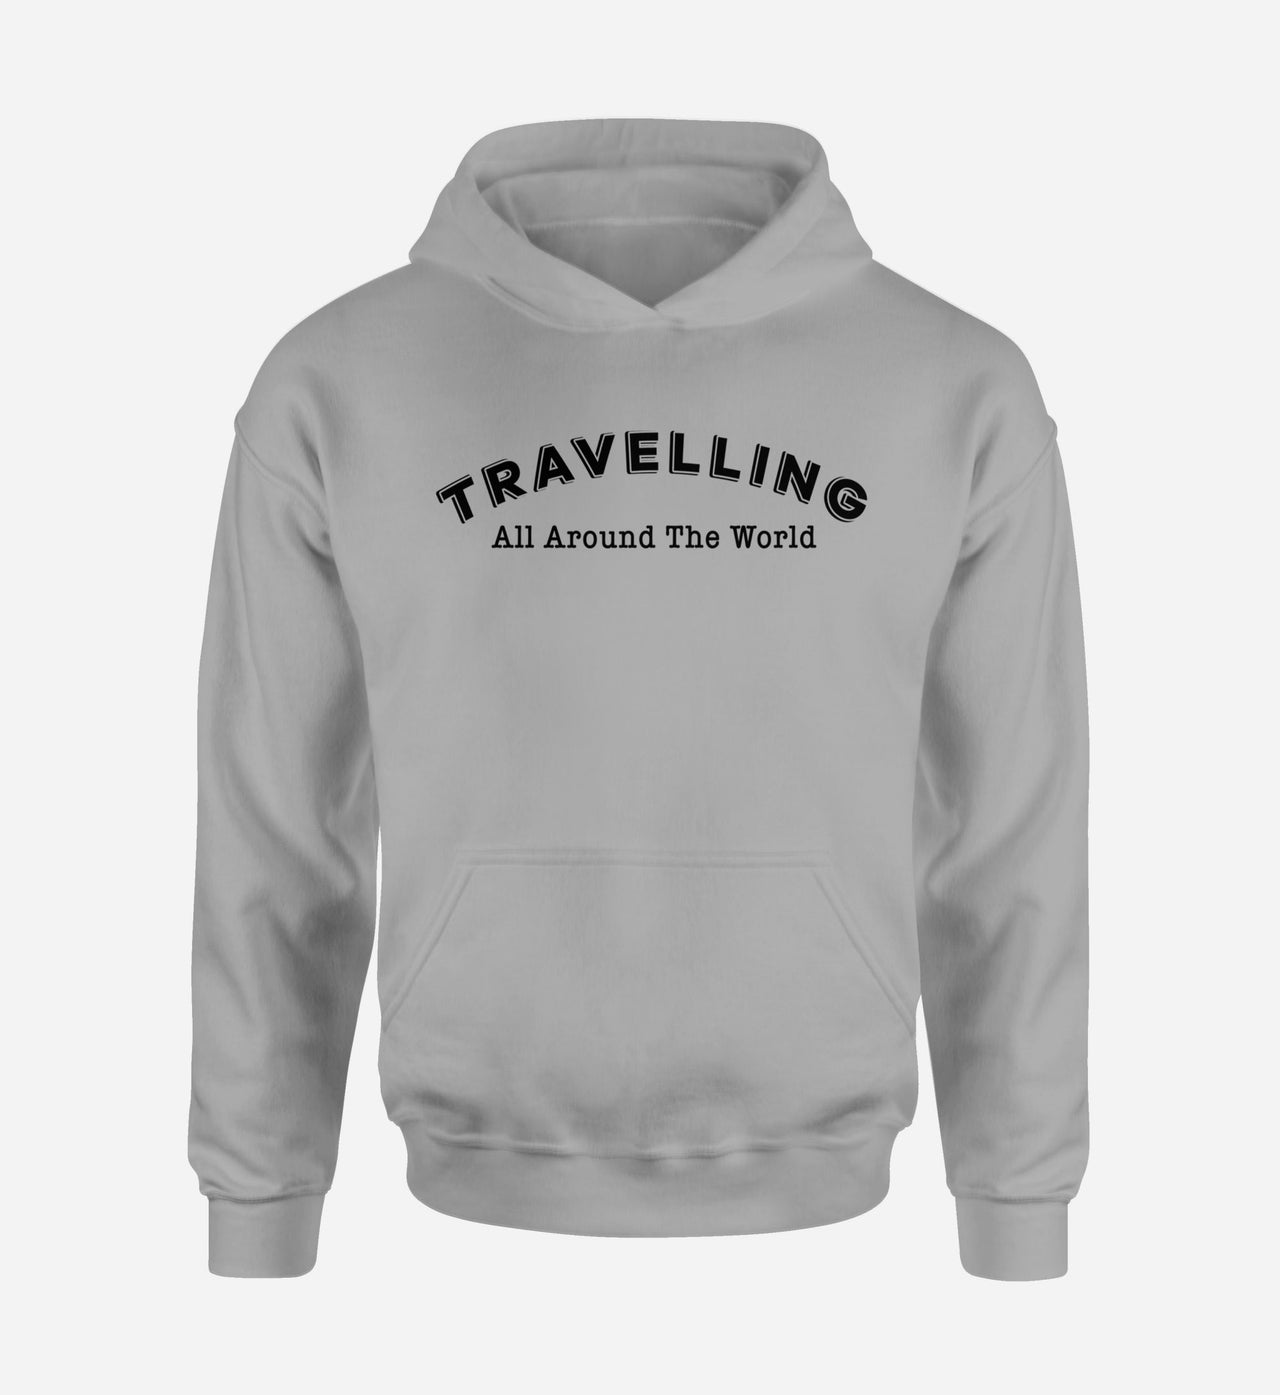 Travelling All Around The World Designed Hoodies